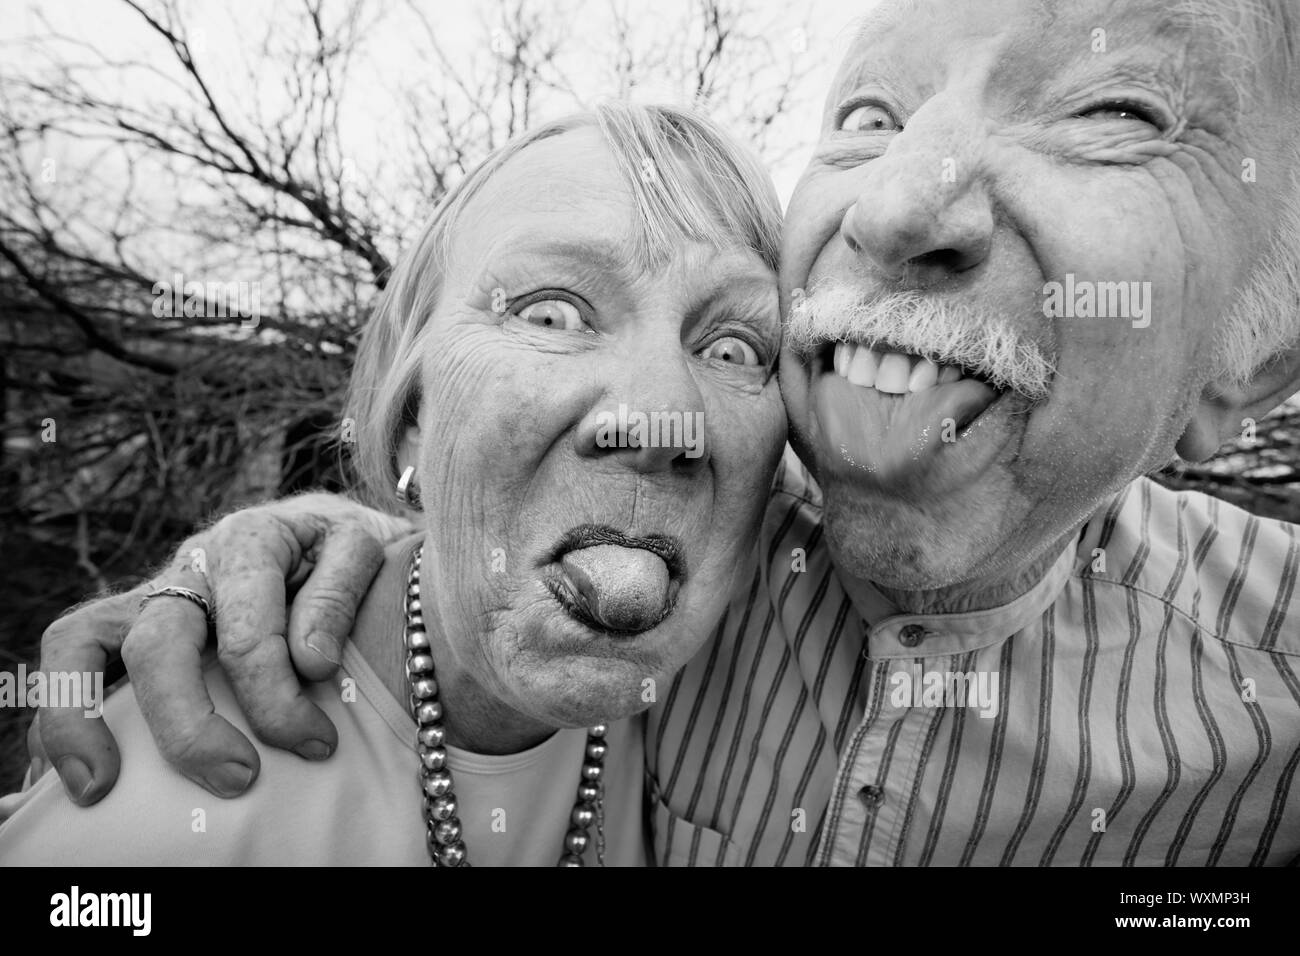 Closeup portrait of crazy elderly couple outdoors sticking out tongues Stock Photo